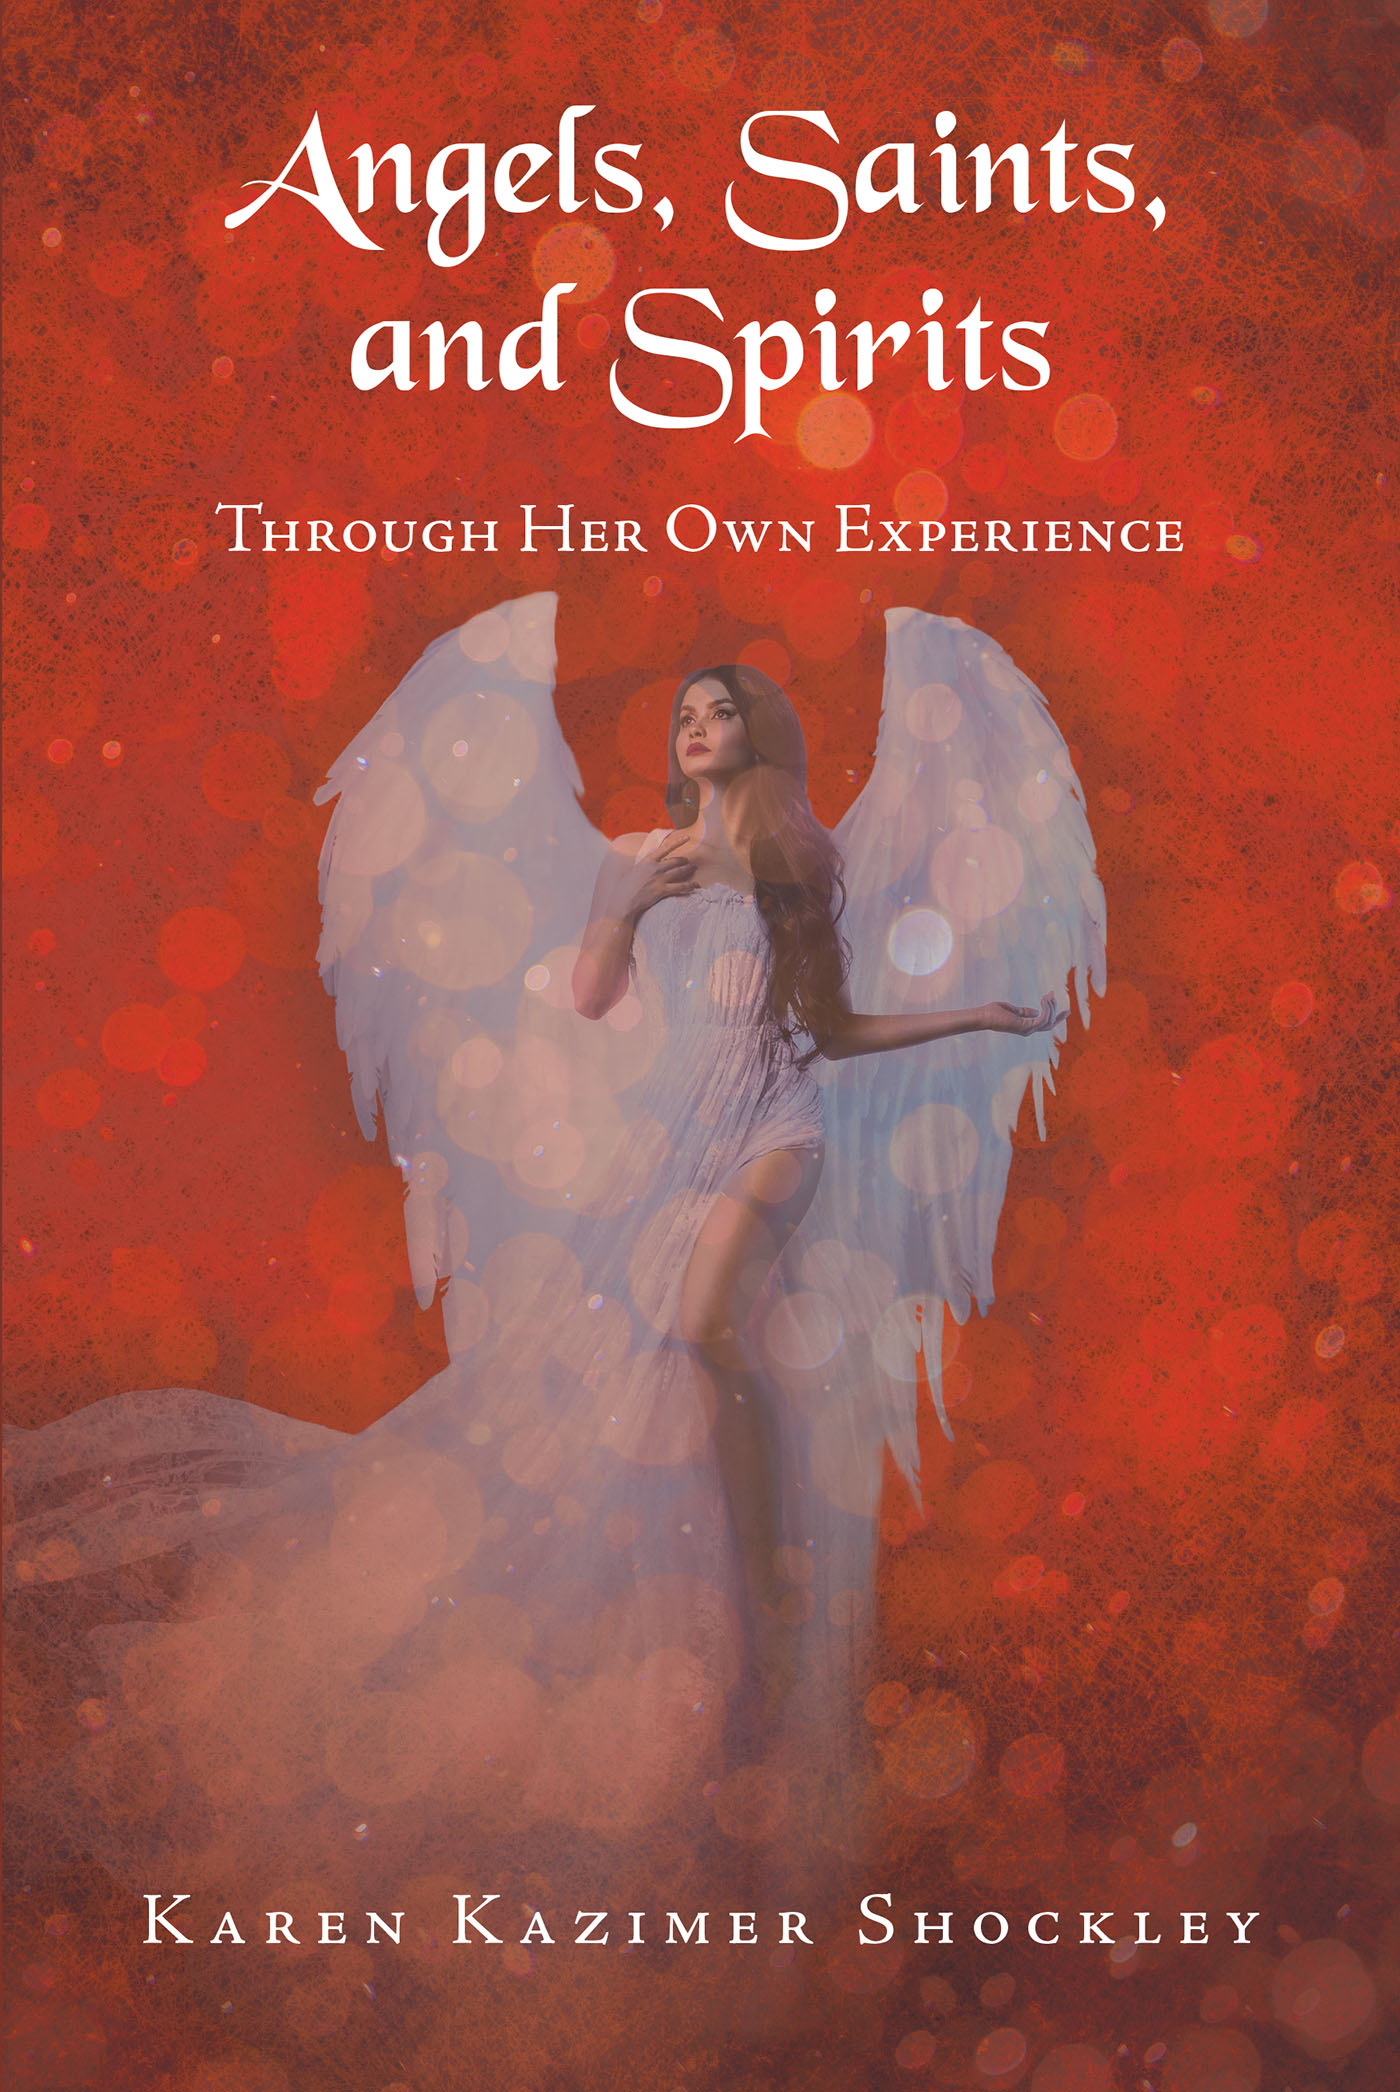 Karen Kazimer Shockley’s Newly Released "Angels, Saints, and Spirits: Through Her Own Experience" is a Thoughtful Spiritual Memoir That Celebrates God’s Protection